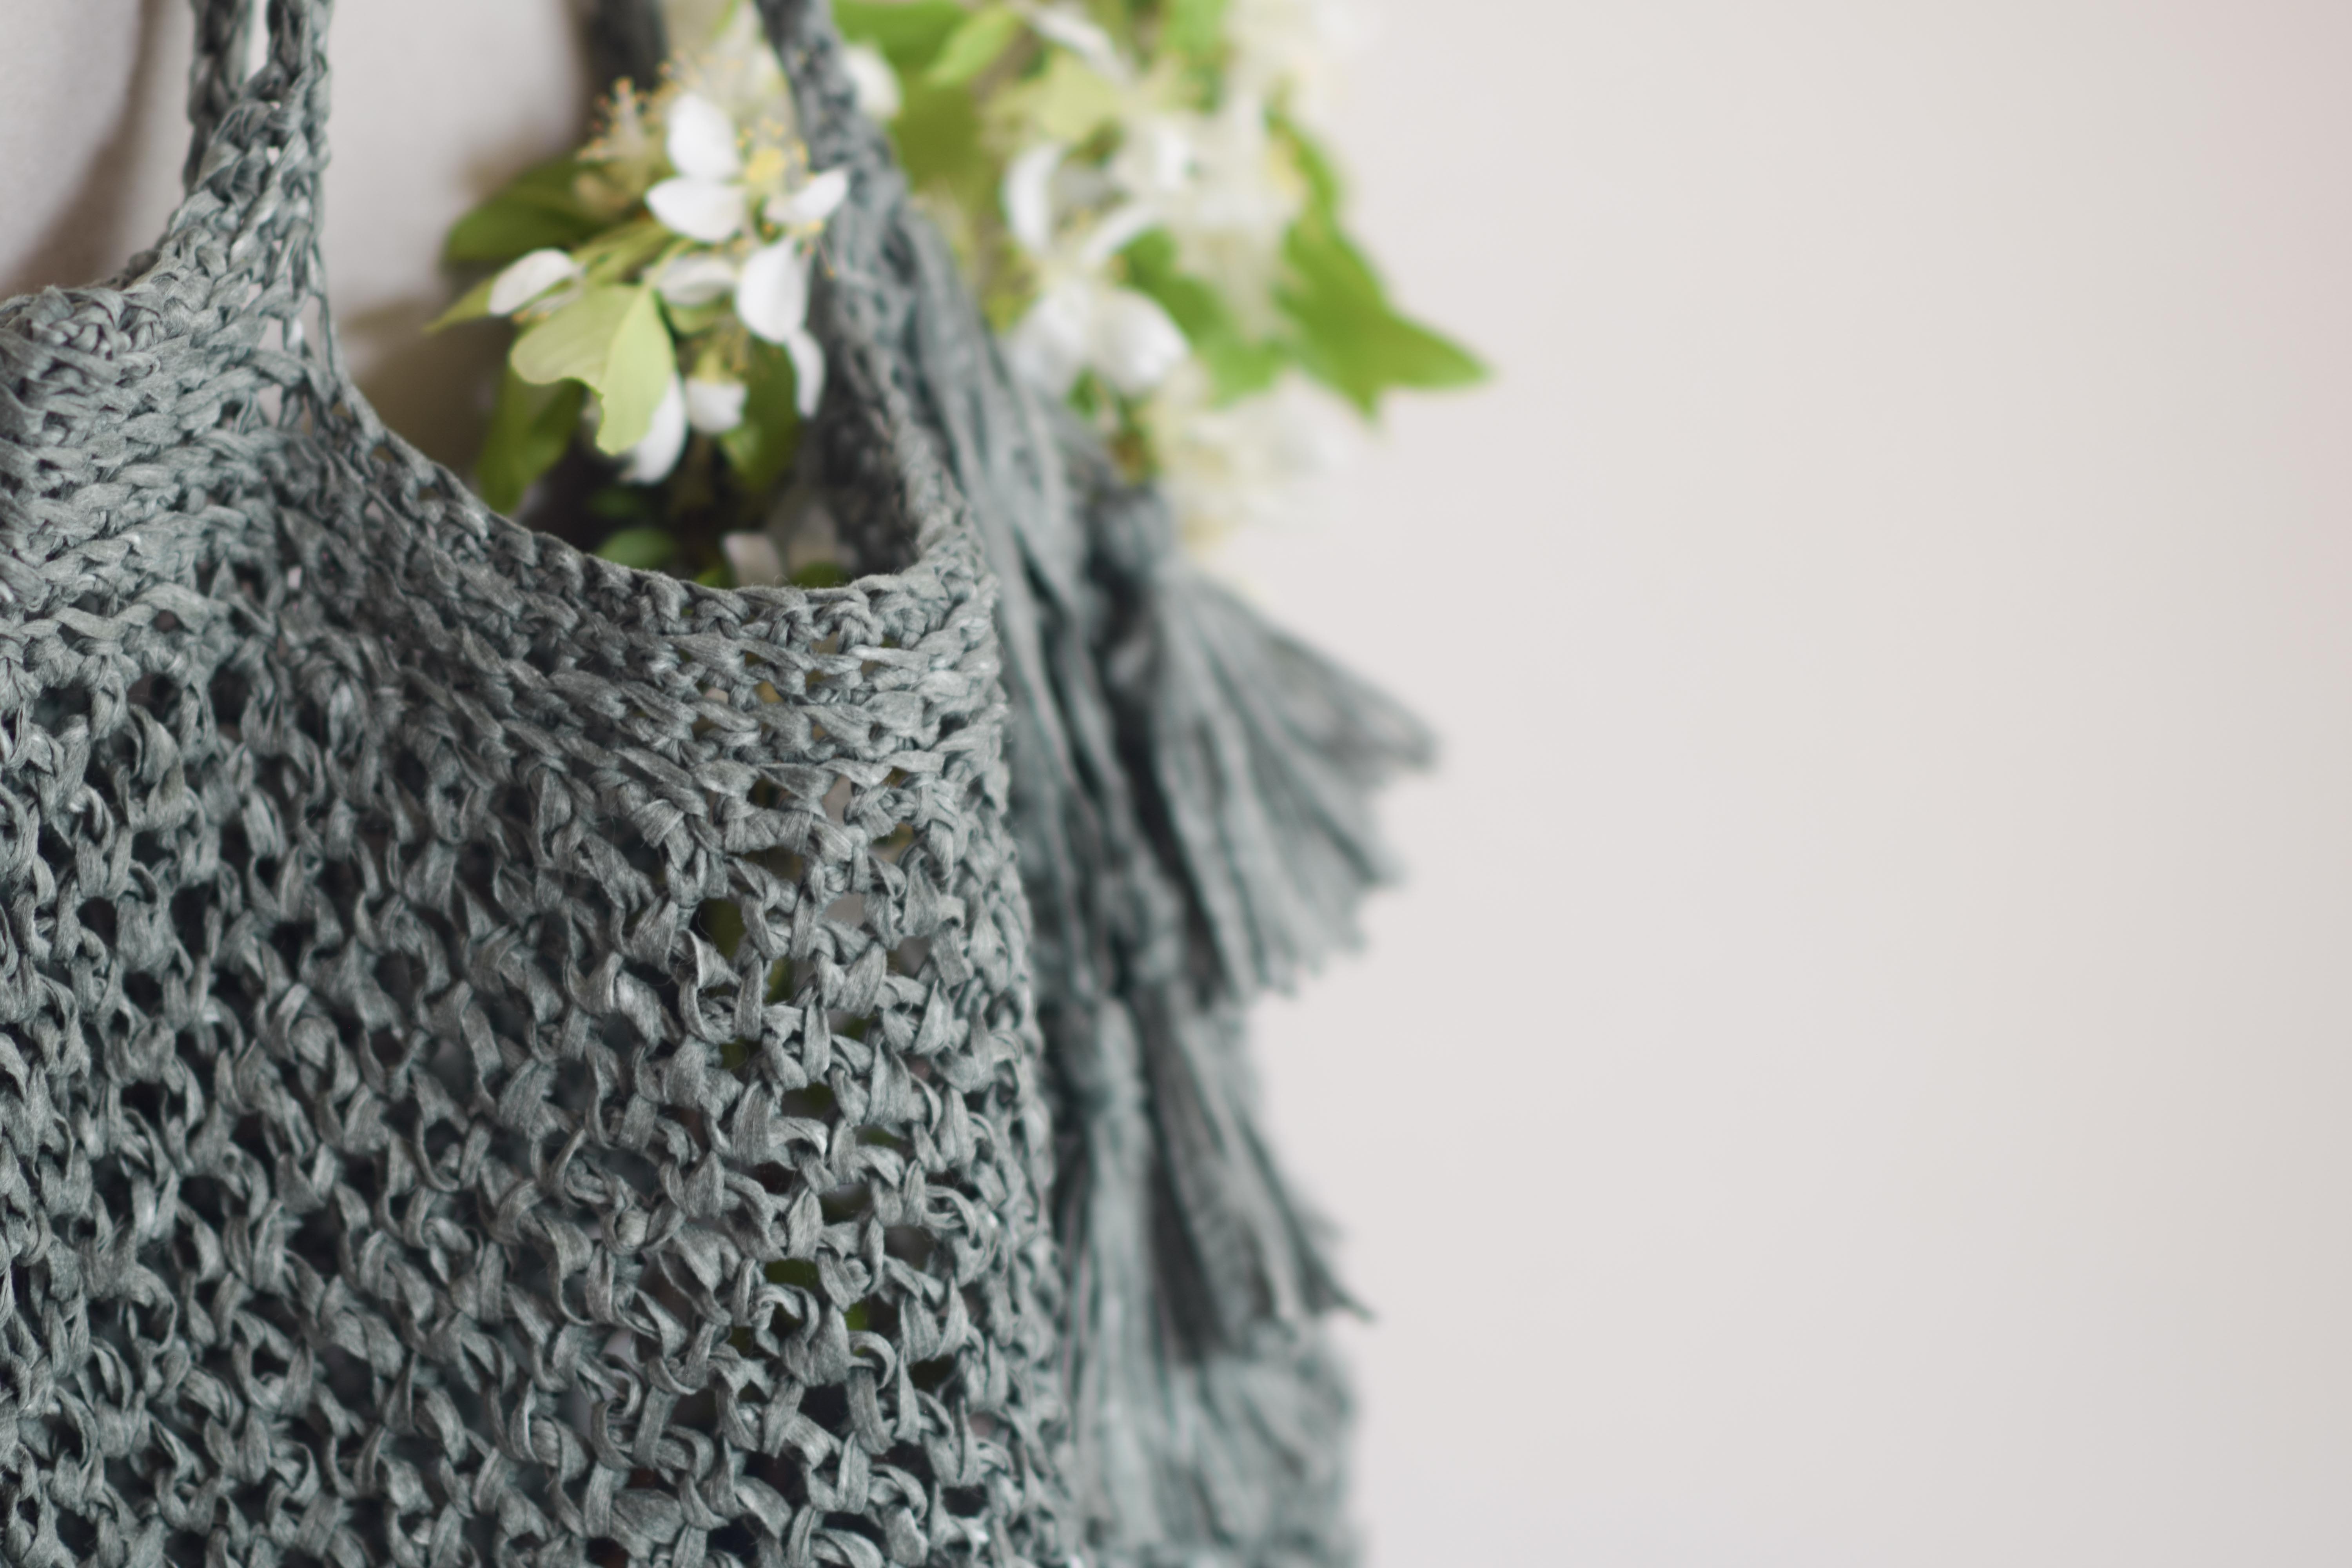 Crochet bag, Easy round circle bag, Pattern No3, with long strap, in both  UK and US crochet terms